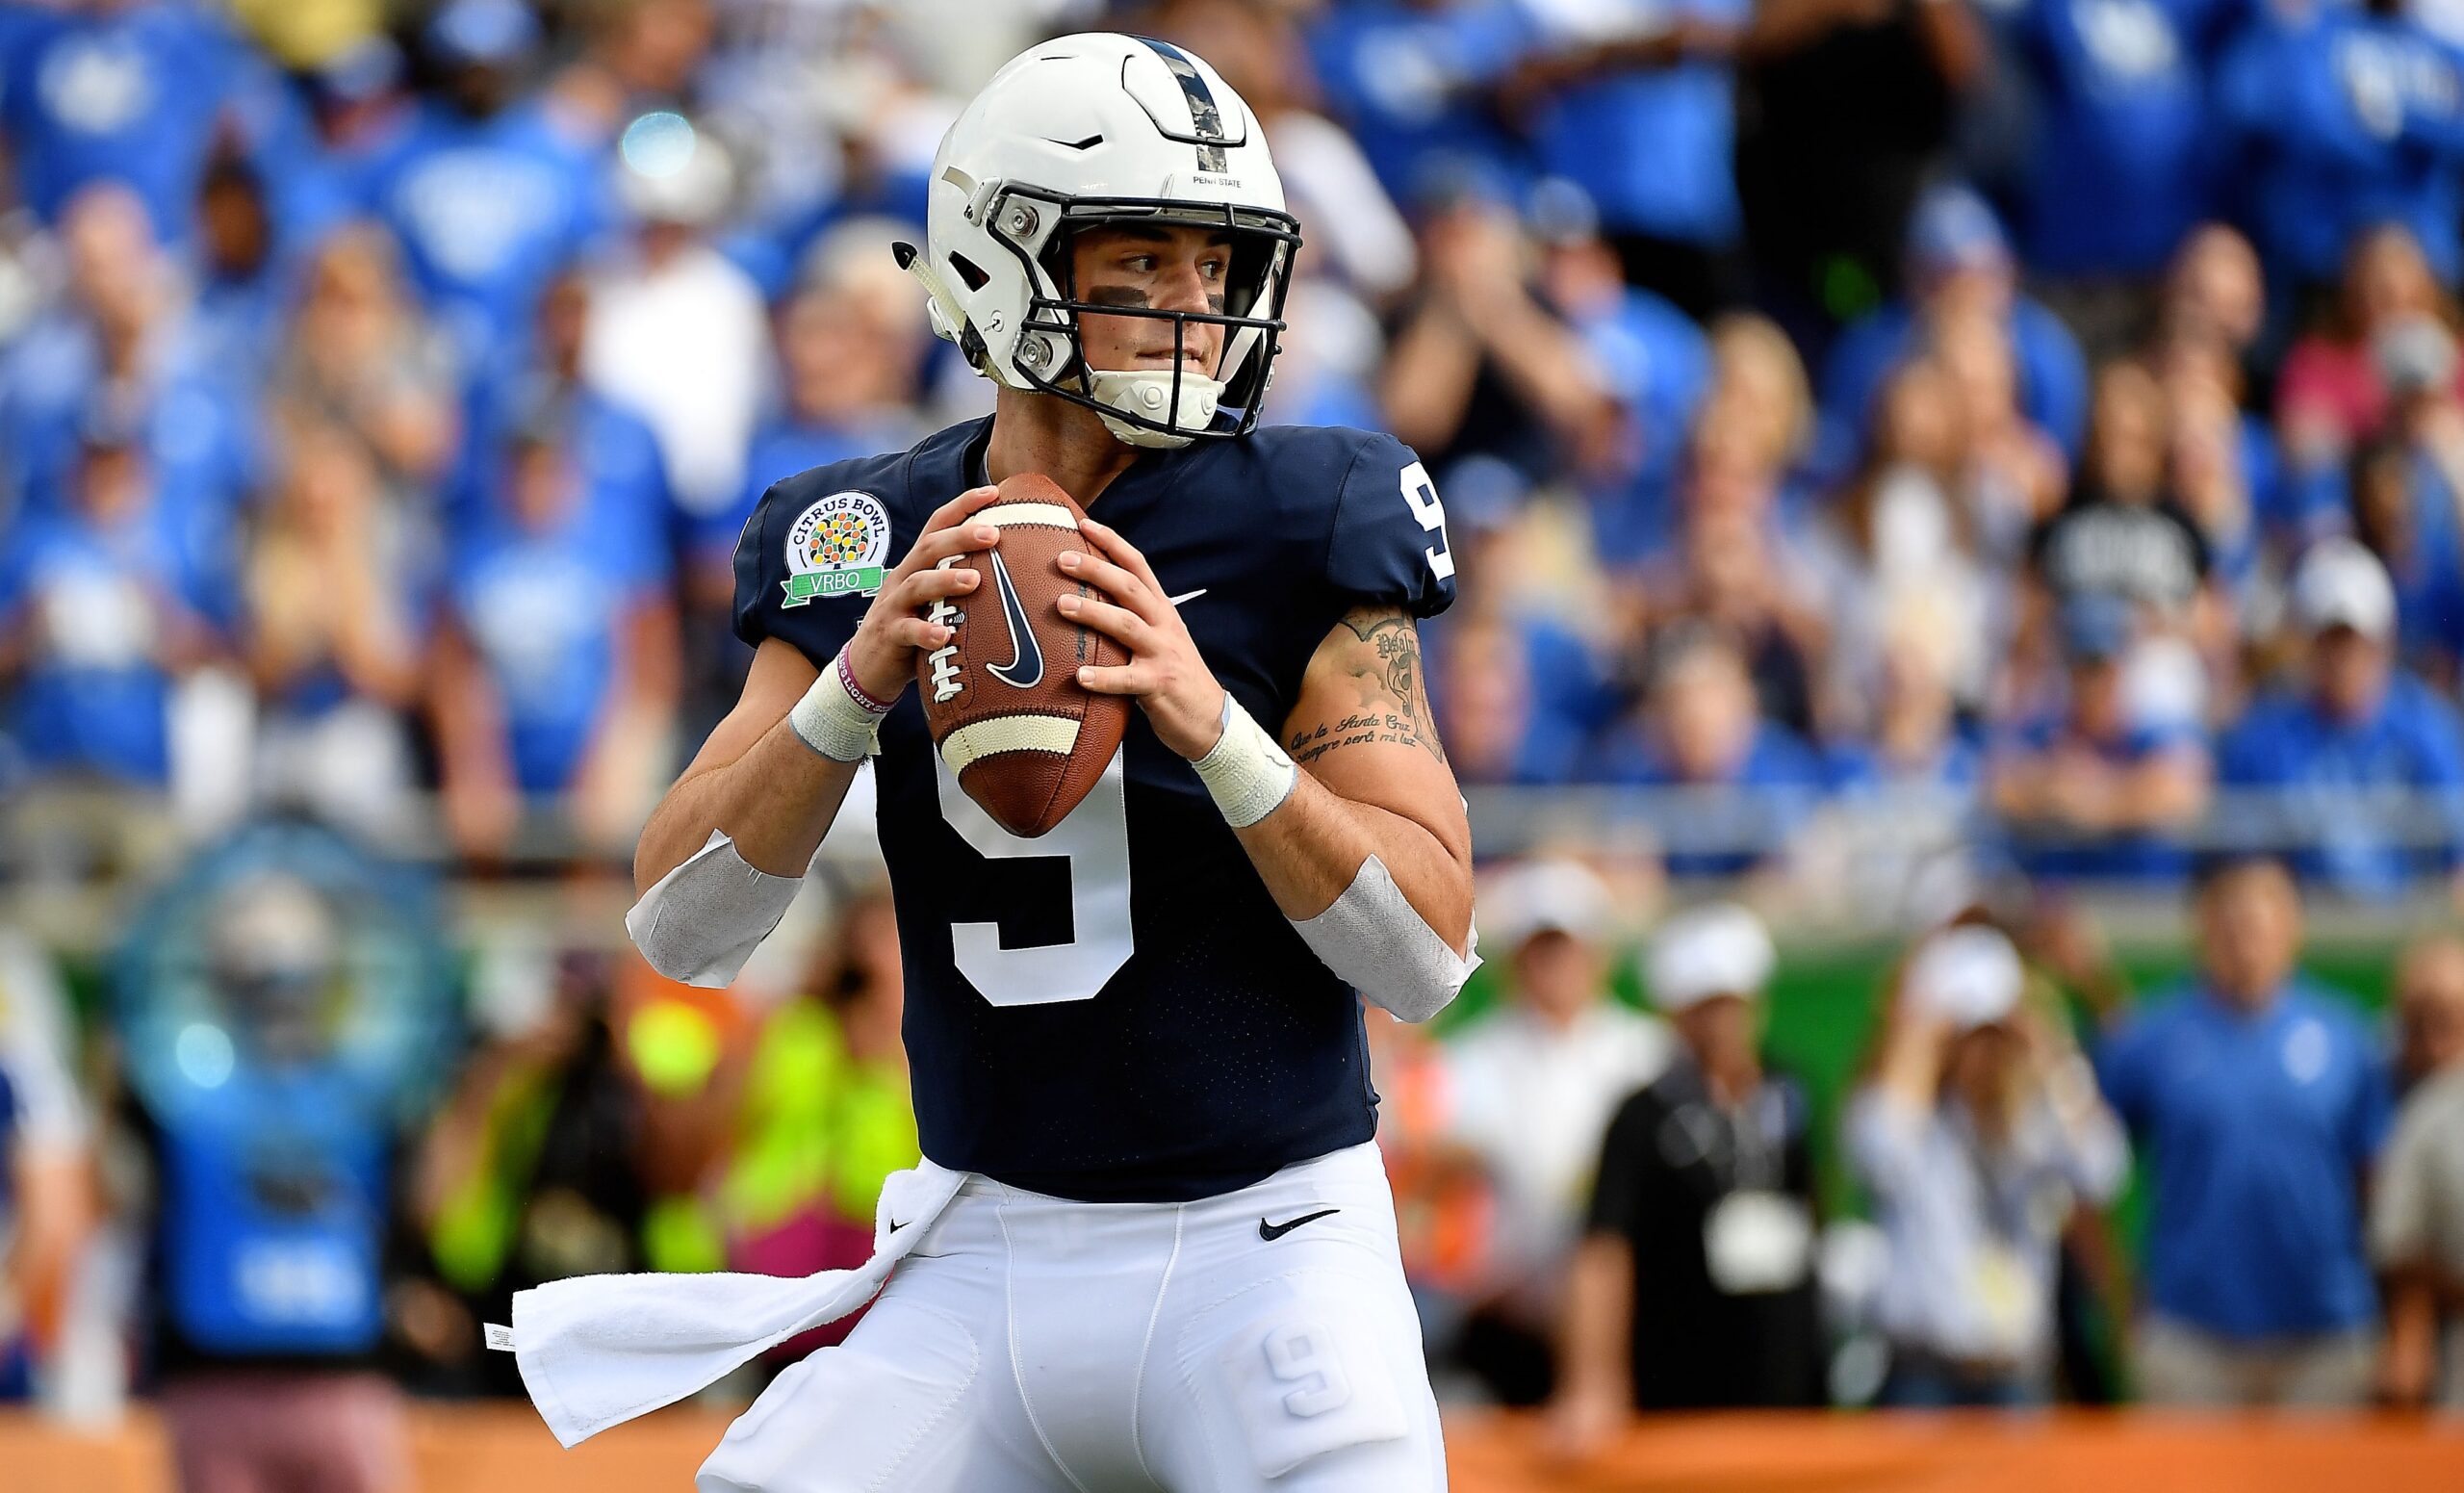 Penn State football legends, Trace McSorley